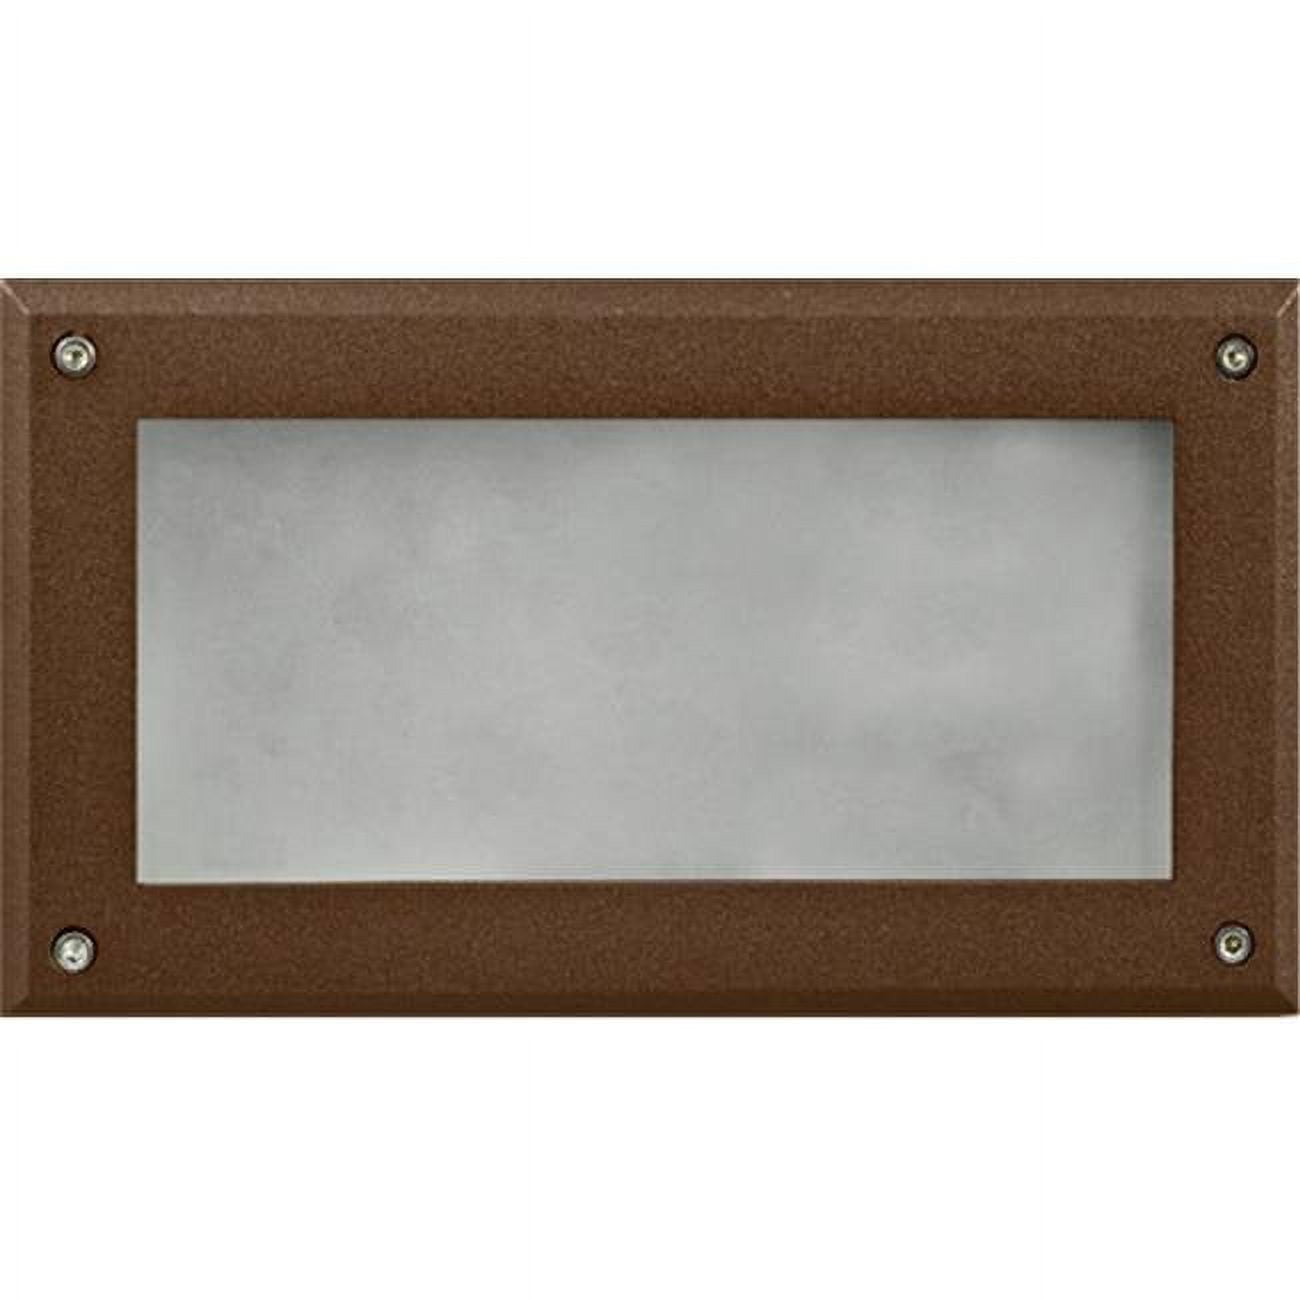 Picture of Dabmar Lighting DSL1001-BZ Recessed Open Face Brick, Step & Wall Light, Bronze - 5 x 8.90 x 3.15 in.